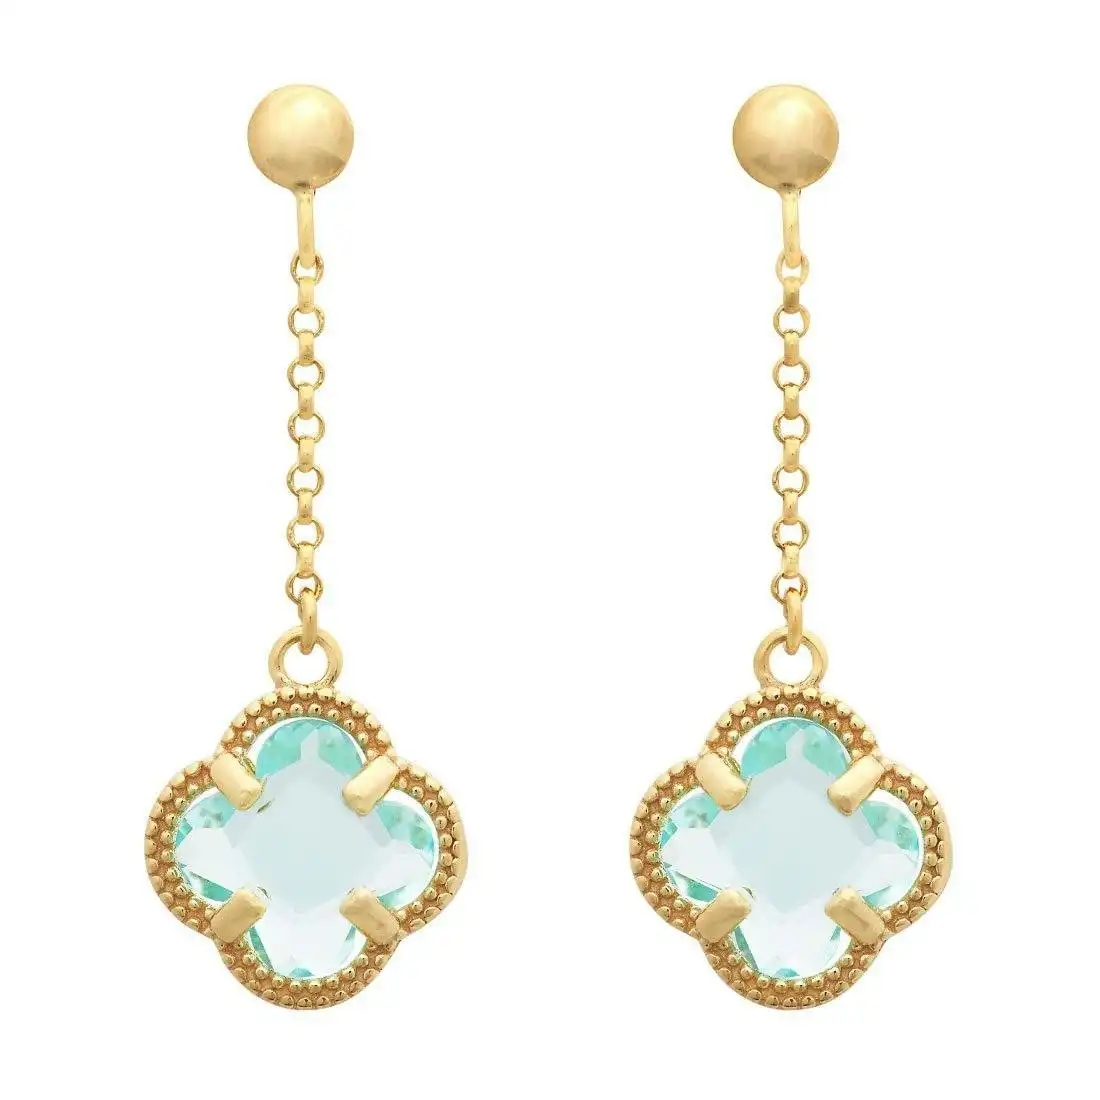 Blue 4 Leaf Clover Drop Earrings in 9ct Yellow Gold Silver Infused